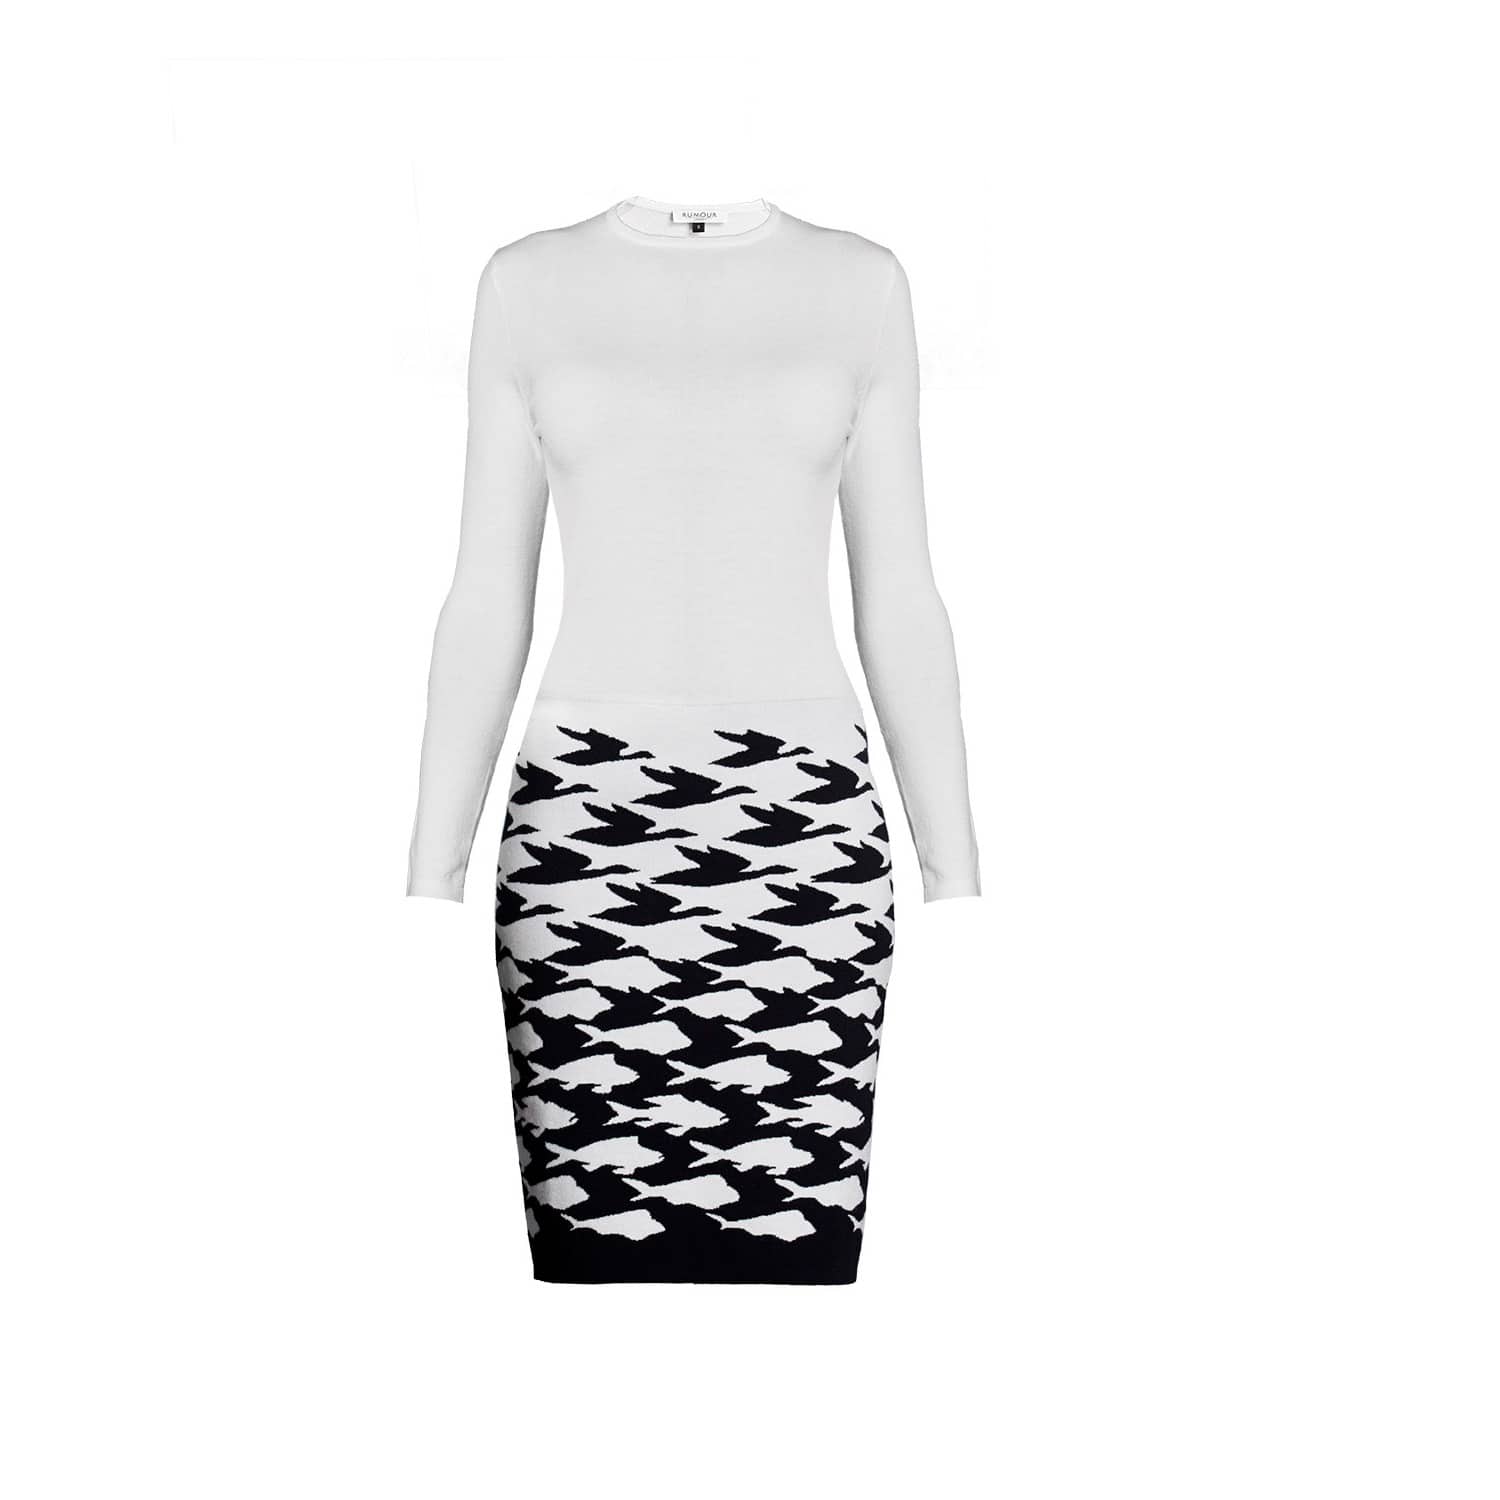 Tailored dress with contrasting contour jacquard skirt – RUMOUR LONDON